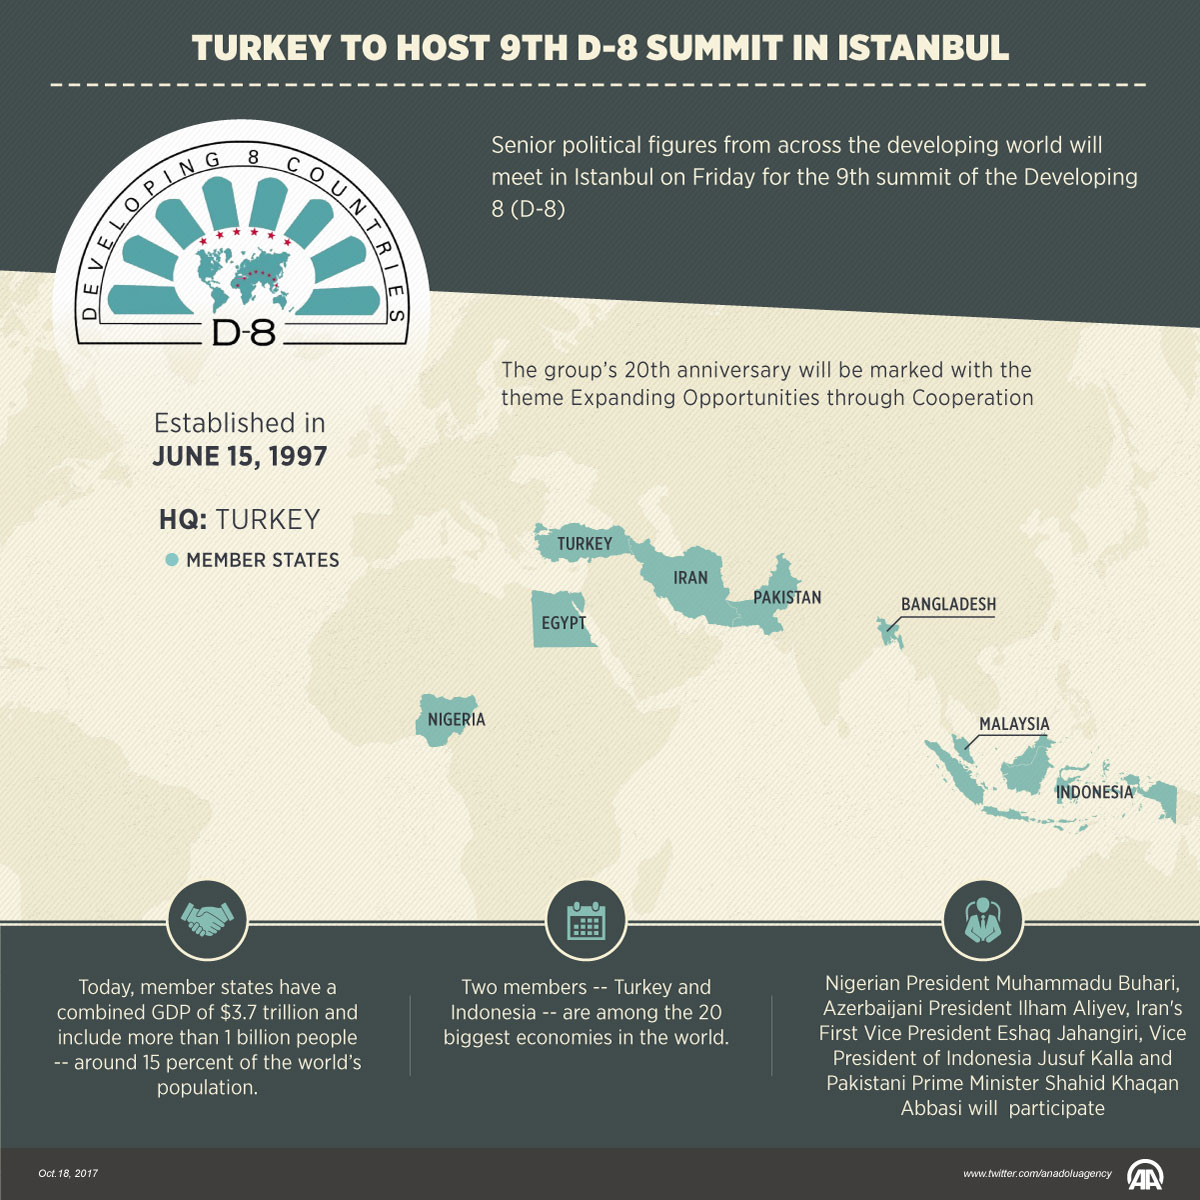 Turkey to host 9th D-8 summit in Istanbul